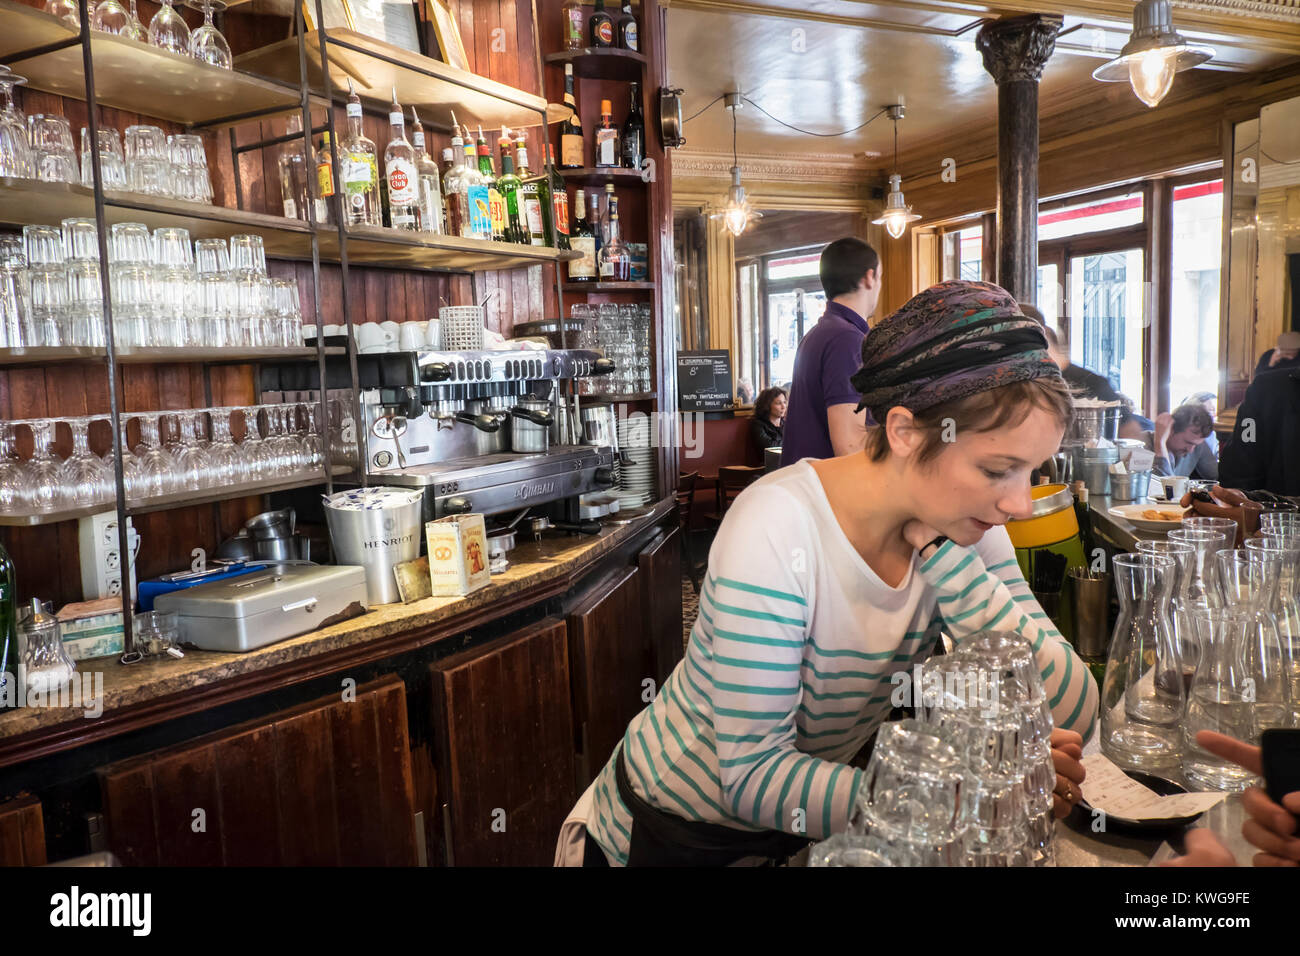 France, Paris, Young woman behind bar in the cafe La Marine Stock Photo